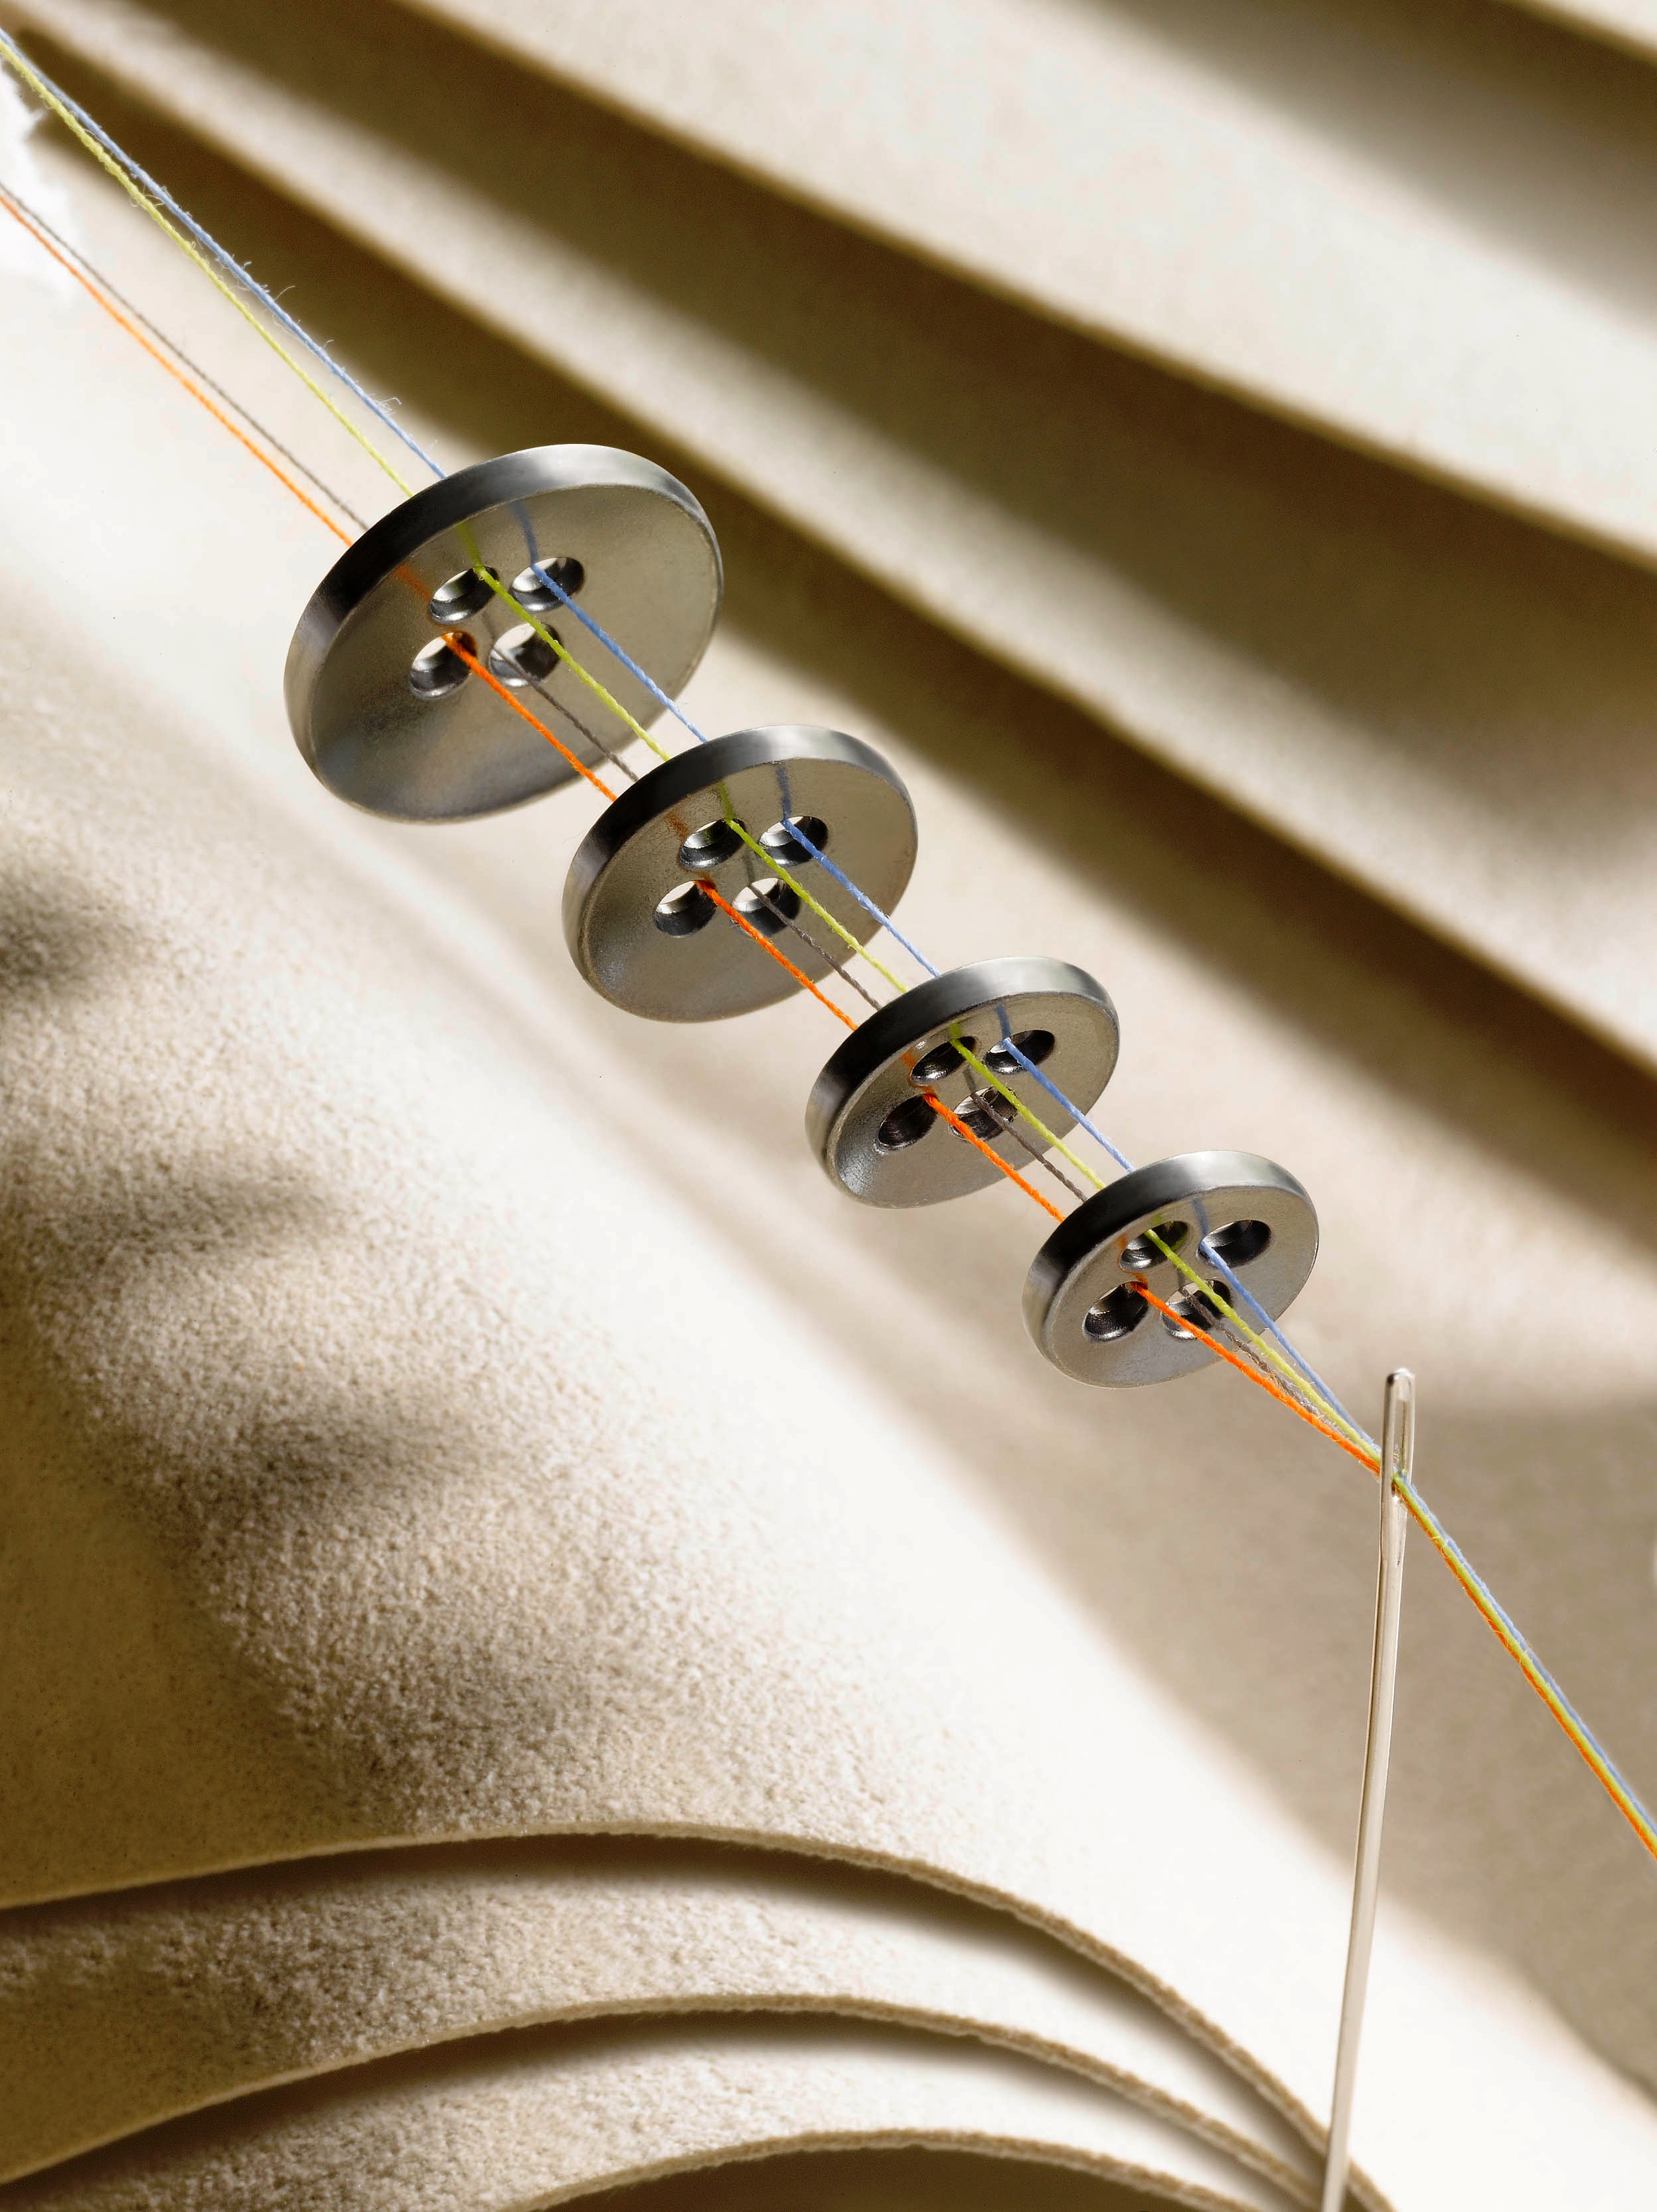 YKK has also developed a range of metal sew-on buttons available in four sizes. © YKK 